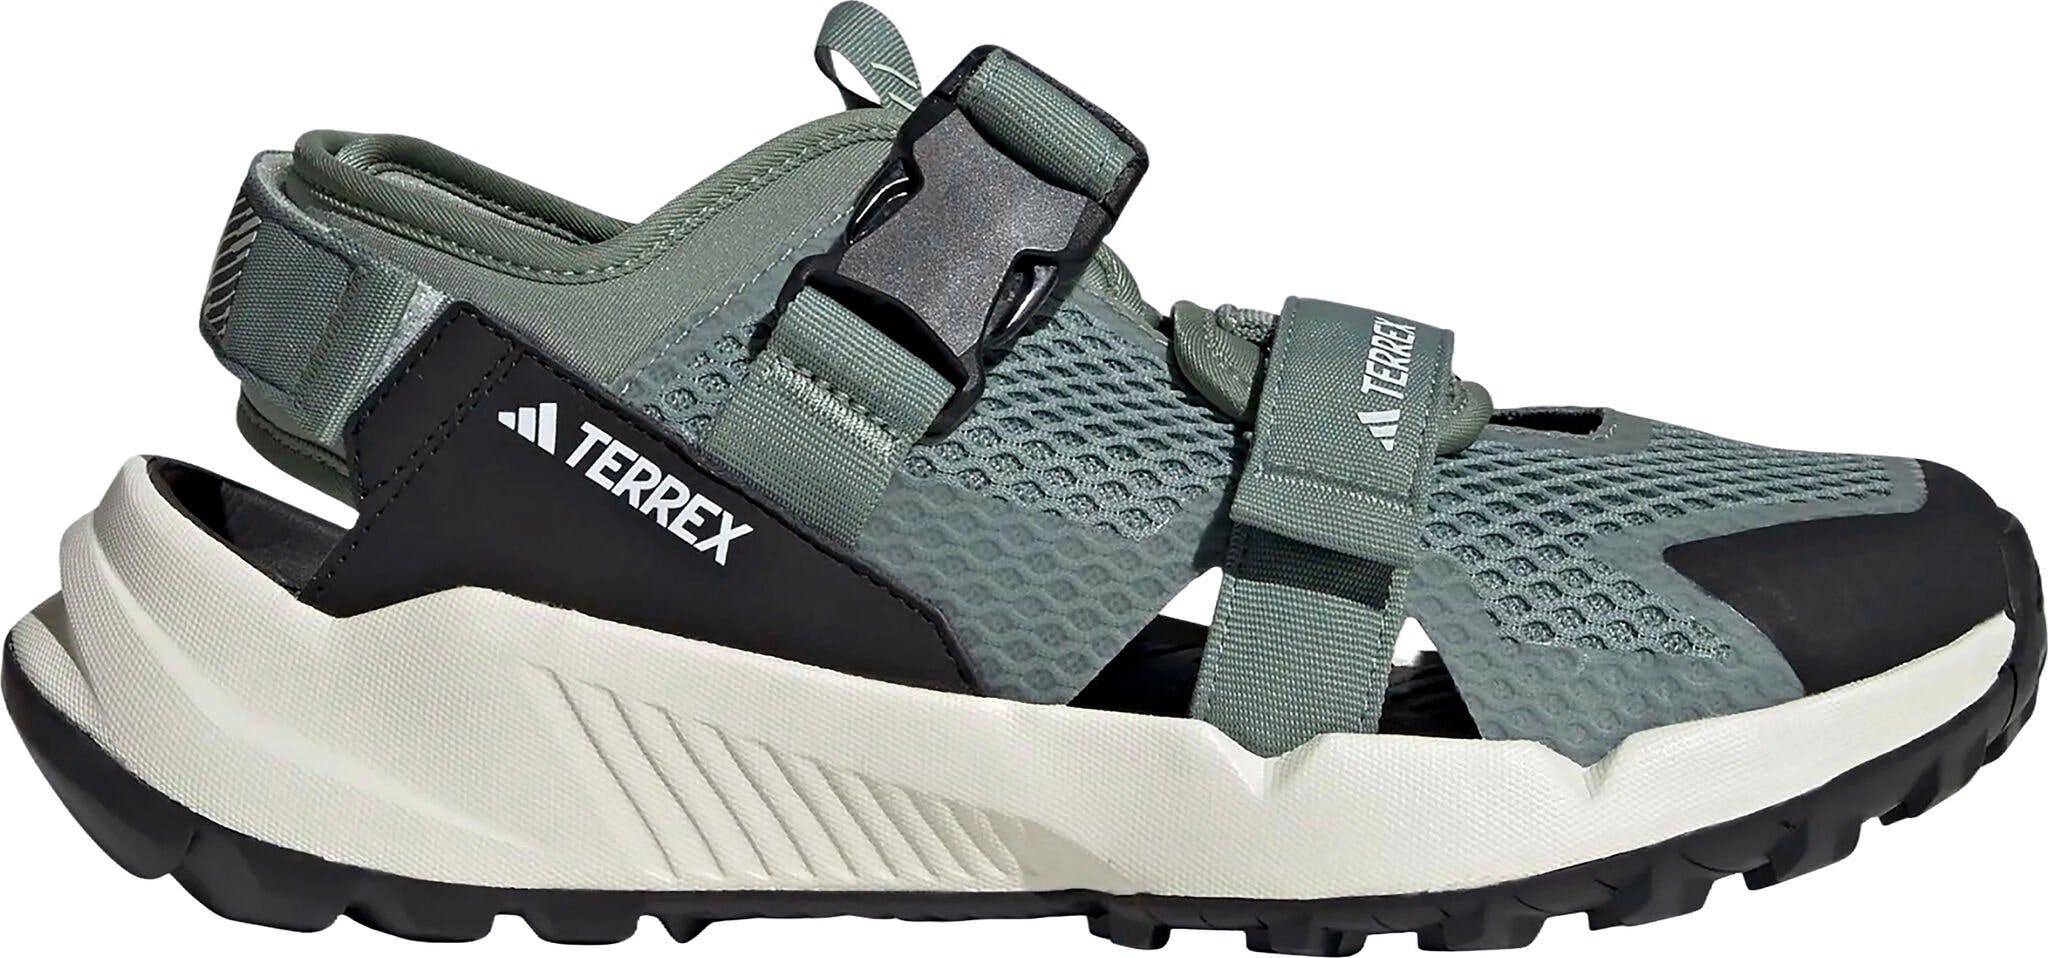 Product image for Terrex Hydroterra AT Hiking Sandals - Unisex